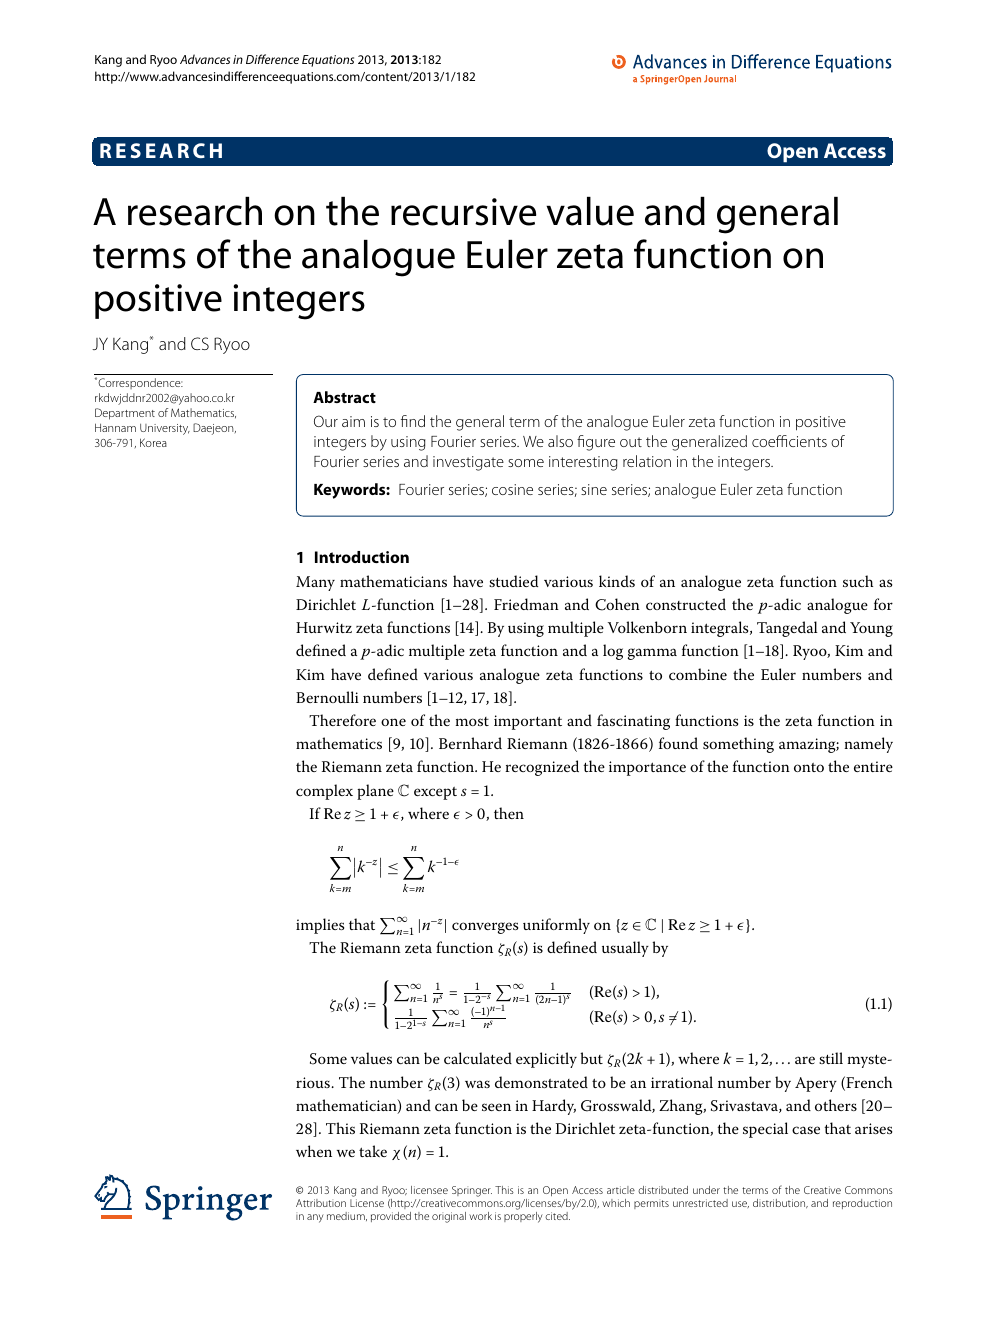 A Research On The Recursive Value And General Terms Of The Analogue Euler Zeta Function On Positive Integers Topic Of Research Paper In Mathematics Download Scholarly Article Pdf And Read For